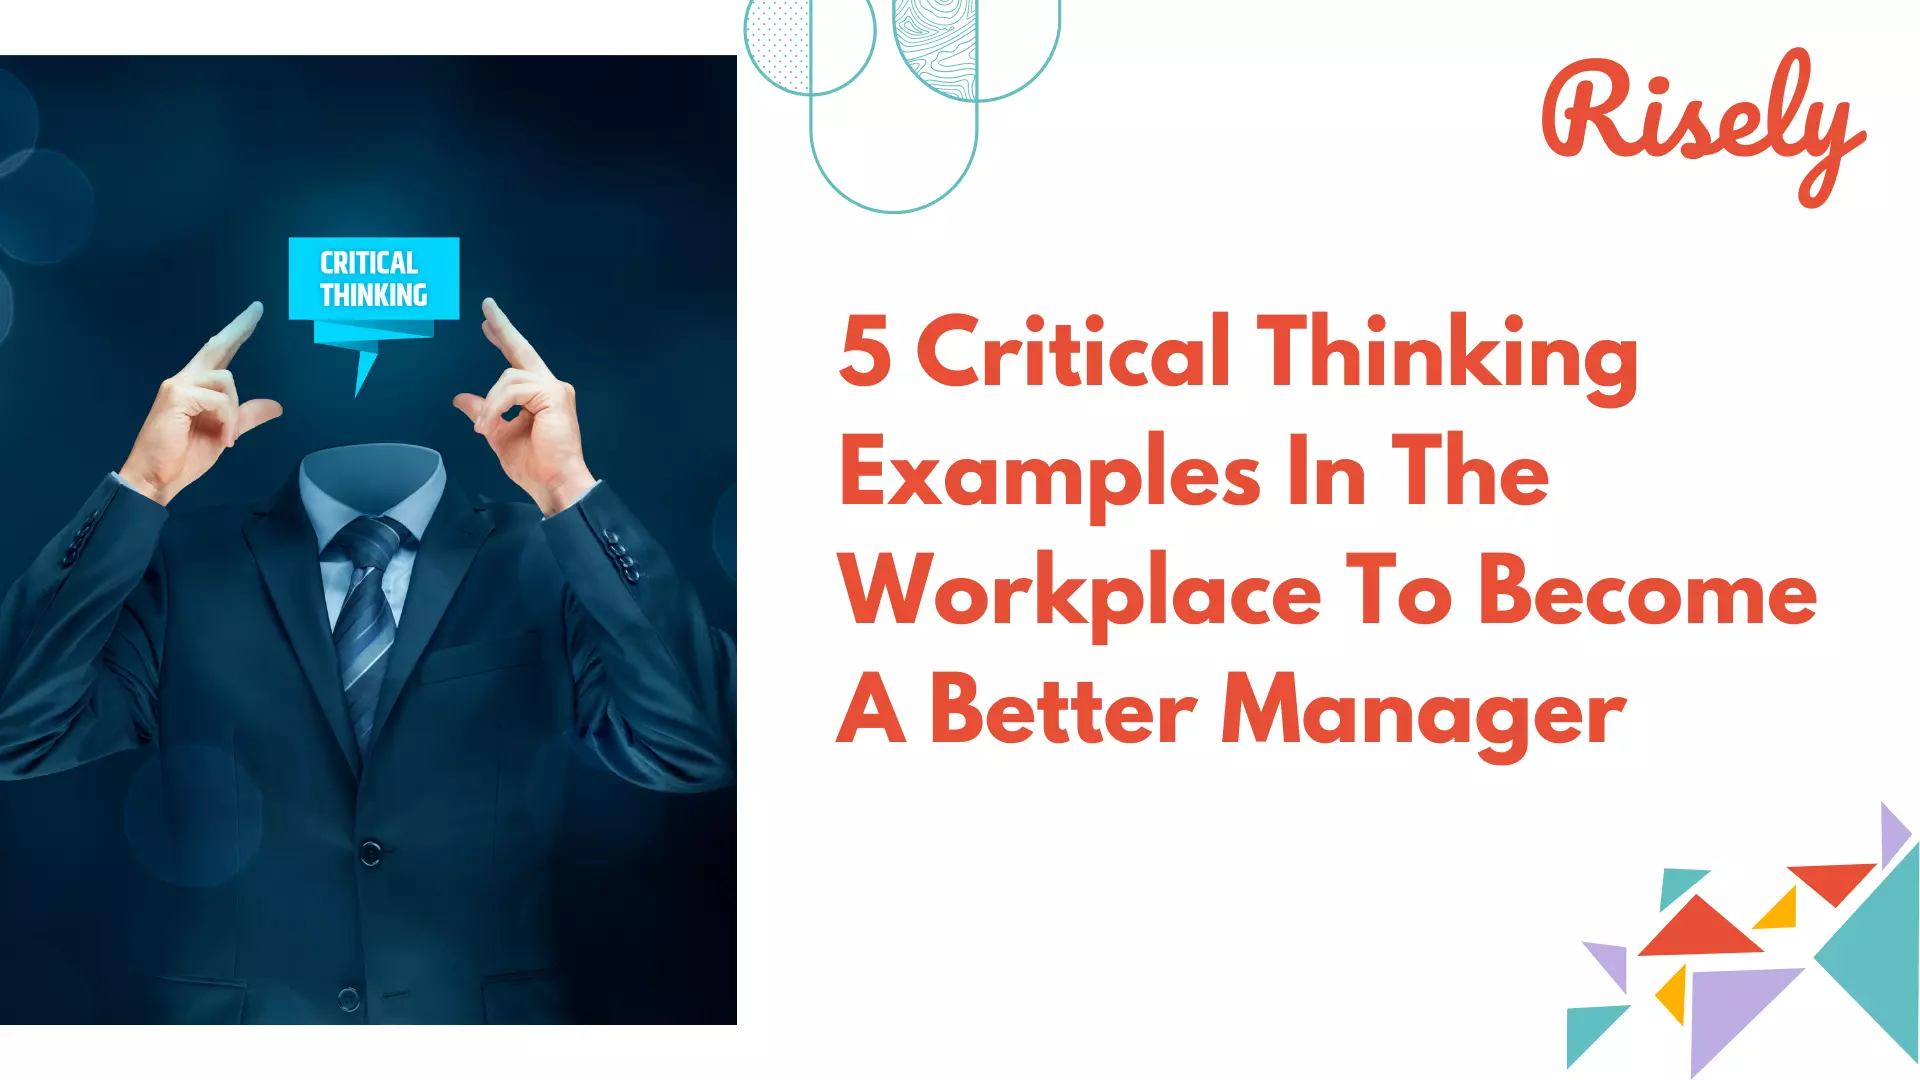 5 Critical Thinking Examples In The Workplace To Become A Better Manager